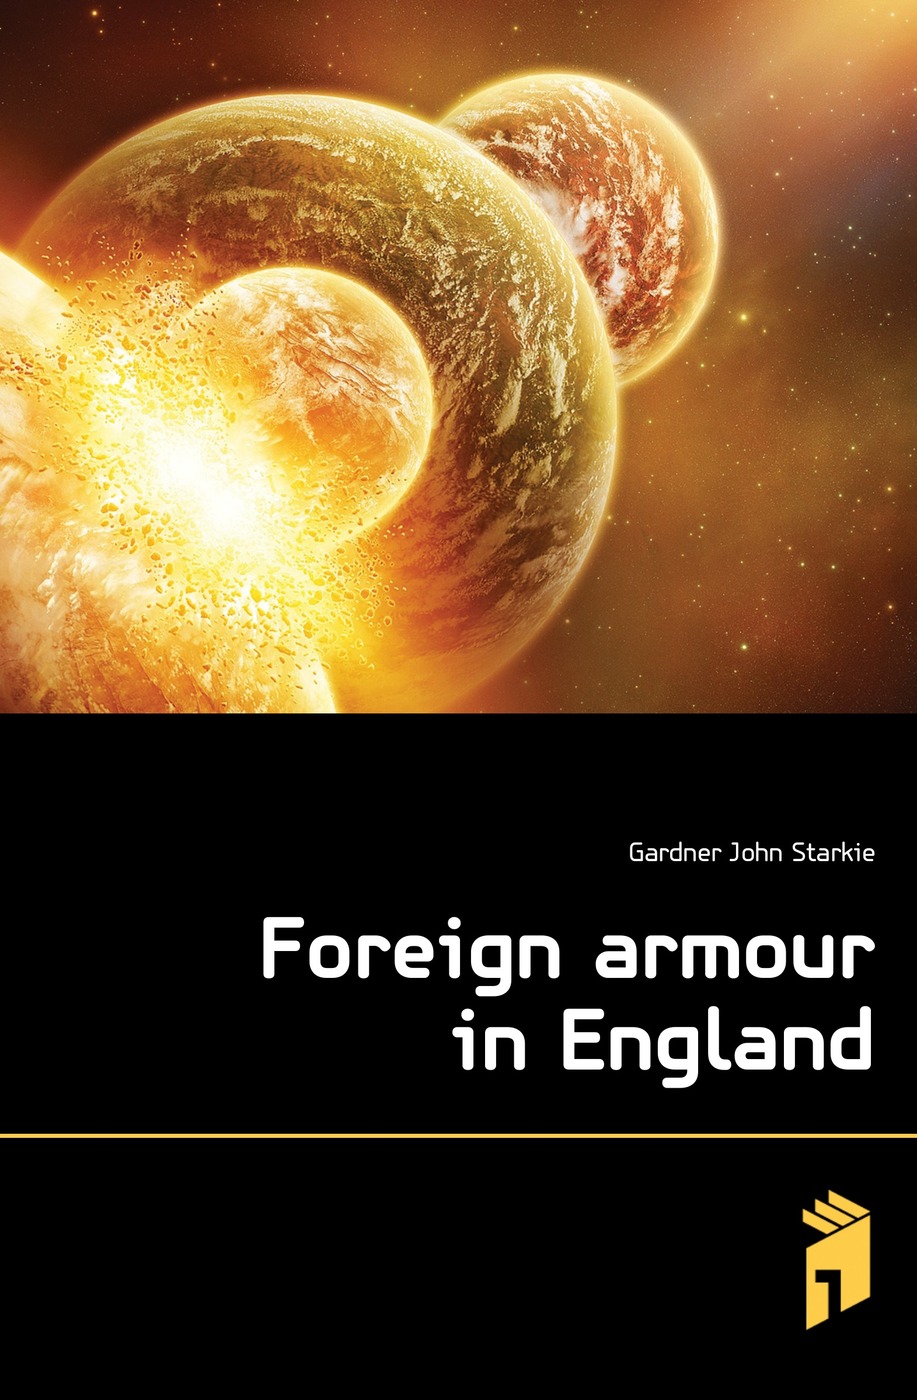 Foreign armour in England